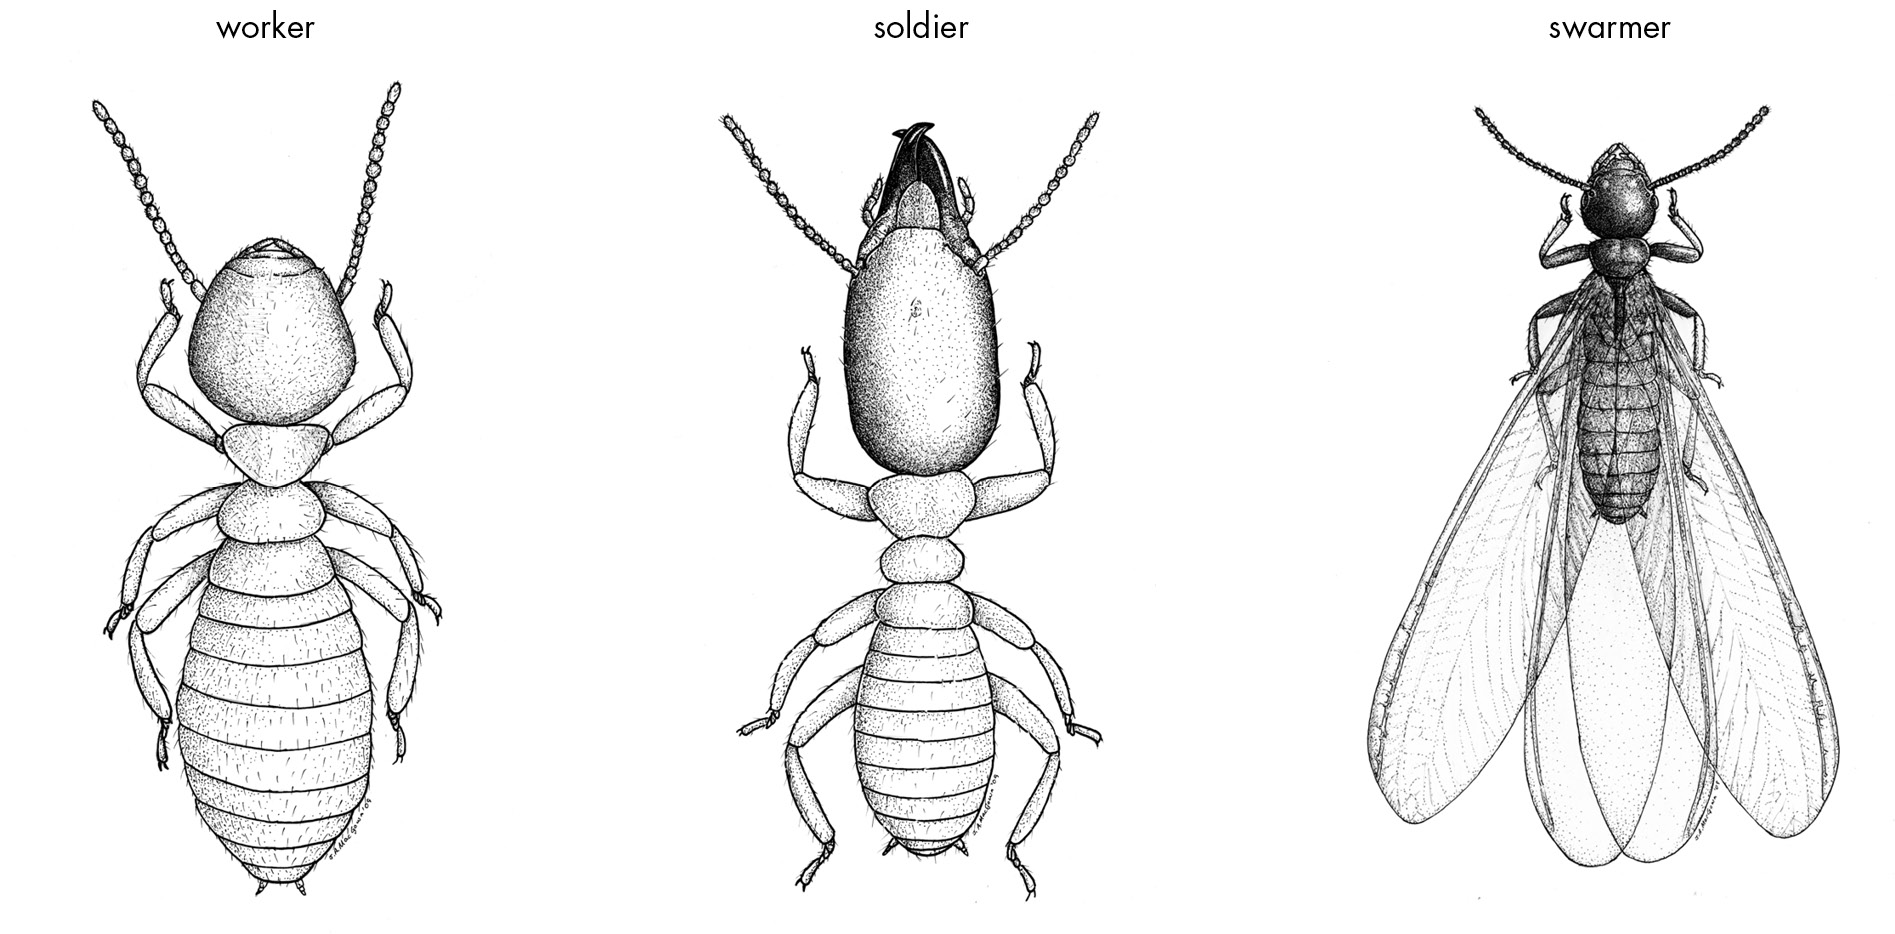 Line drawings of a termite worker, soldier, and swarmer. Workers are entirely white, soft-bodied, and blind, and they have six legs and two antennae. Soldiers have a slimmer body and larger, rectangular head with pincers. Swarmers resemble workers but have two sets of large (about twice the length of their bodies) wings.